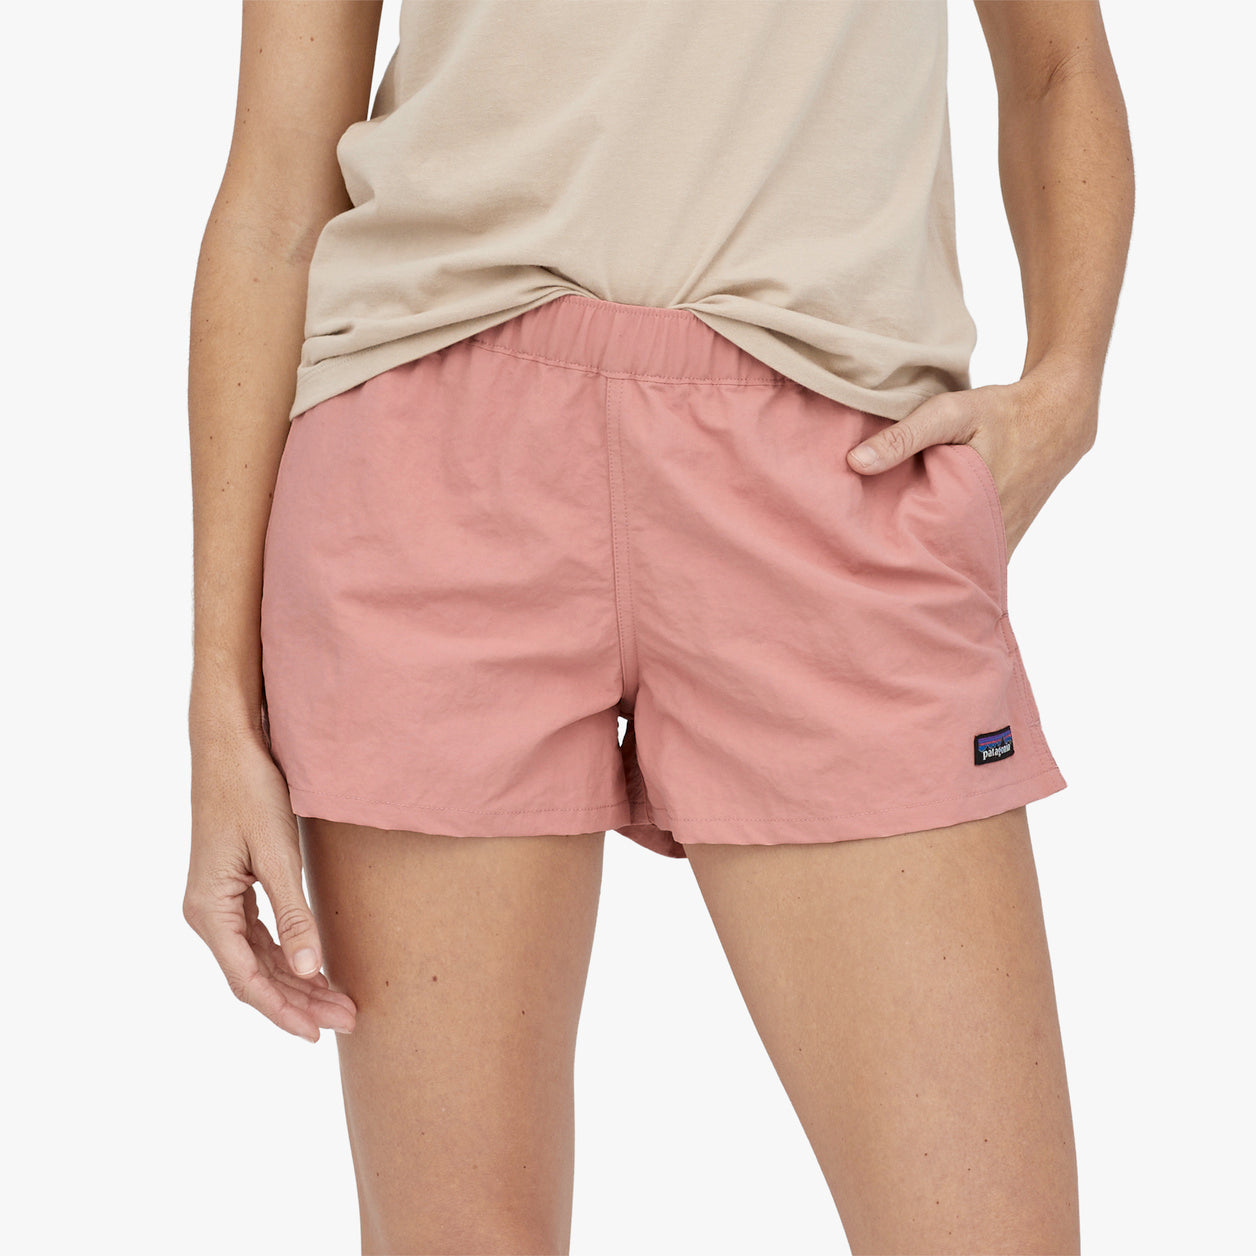 W&#39;s Barely Baggies 2 1/2&quot; SUNFADE PINK
Rugged, multifunctional shorts designed for use in and out of the water, made of quick-drying 100% recycled nylon with a DWR (durable water repellent) finish. Inseam is 2.5&quot;. Fair Trade Certified™ sewn. PATAGONIA